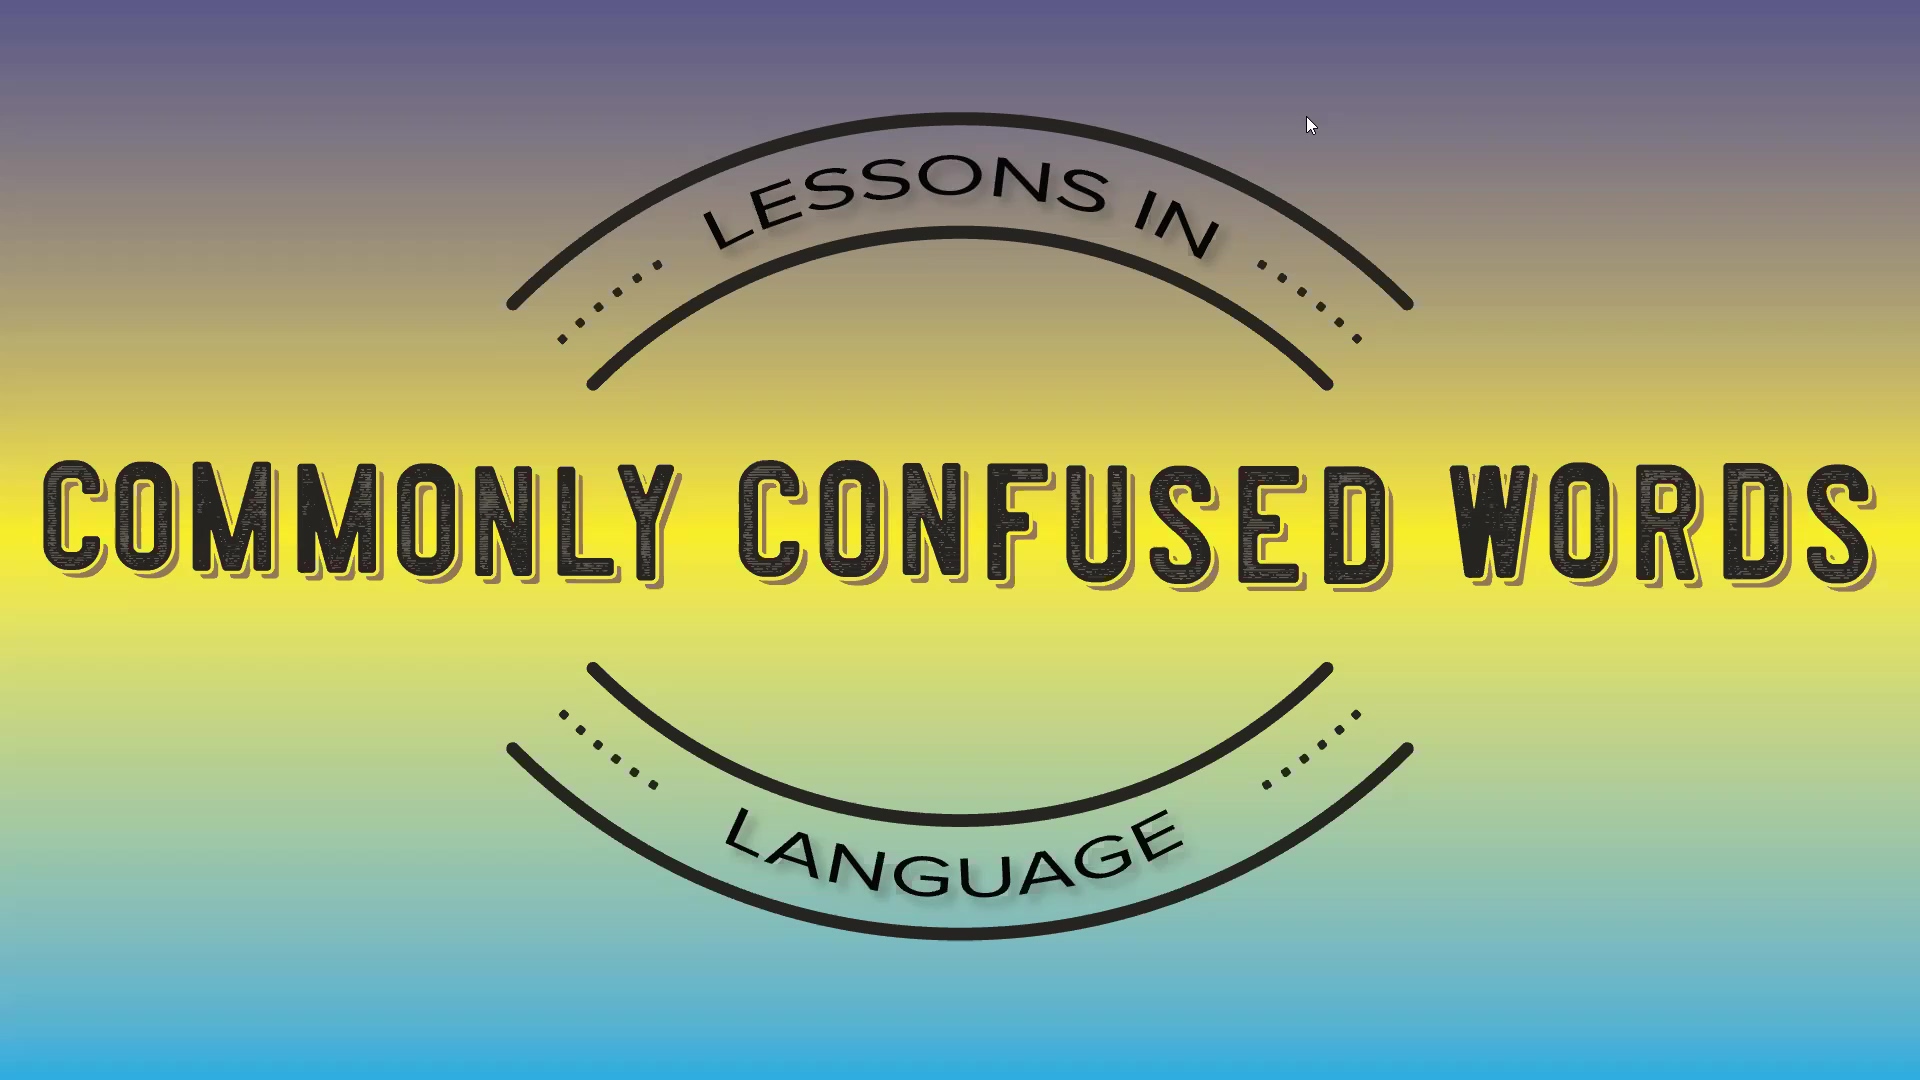 lessons-in-language-commonly-confused-words-essential-education